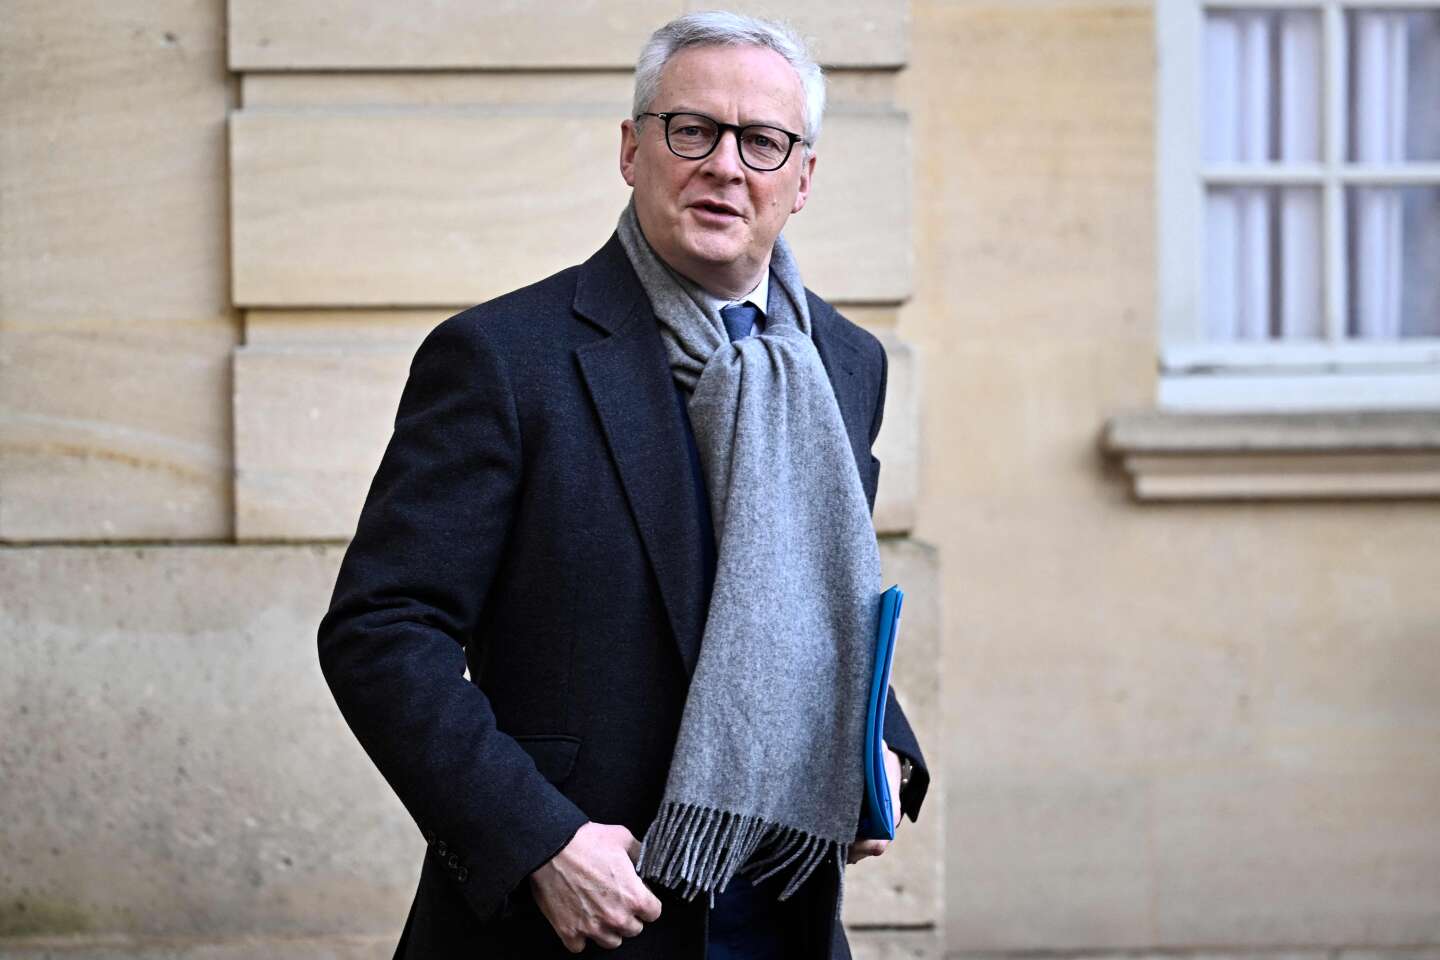 Electricity prices will increase from 8.6% to 9.8% on February 1, announces Bruno Le Maire